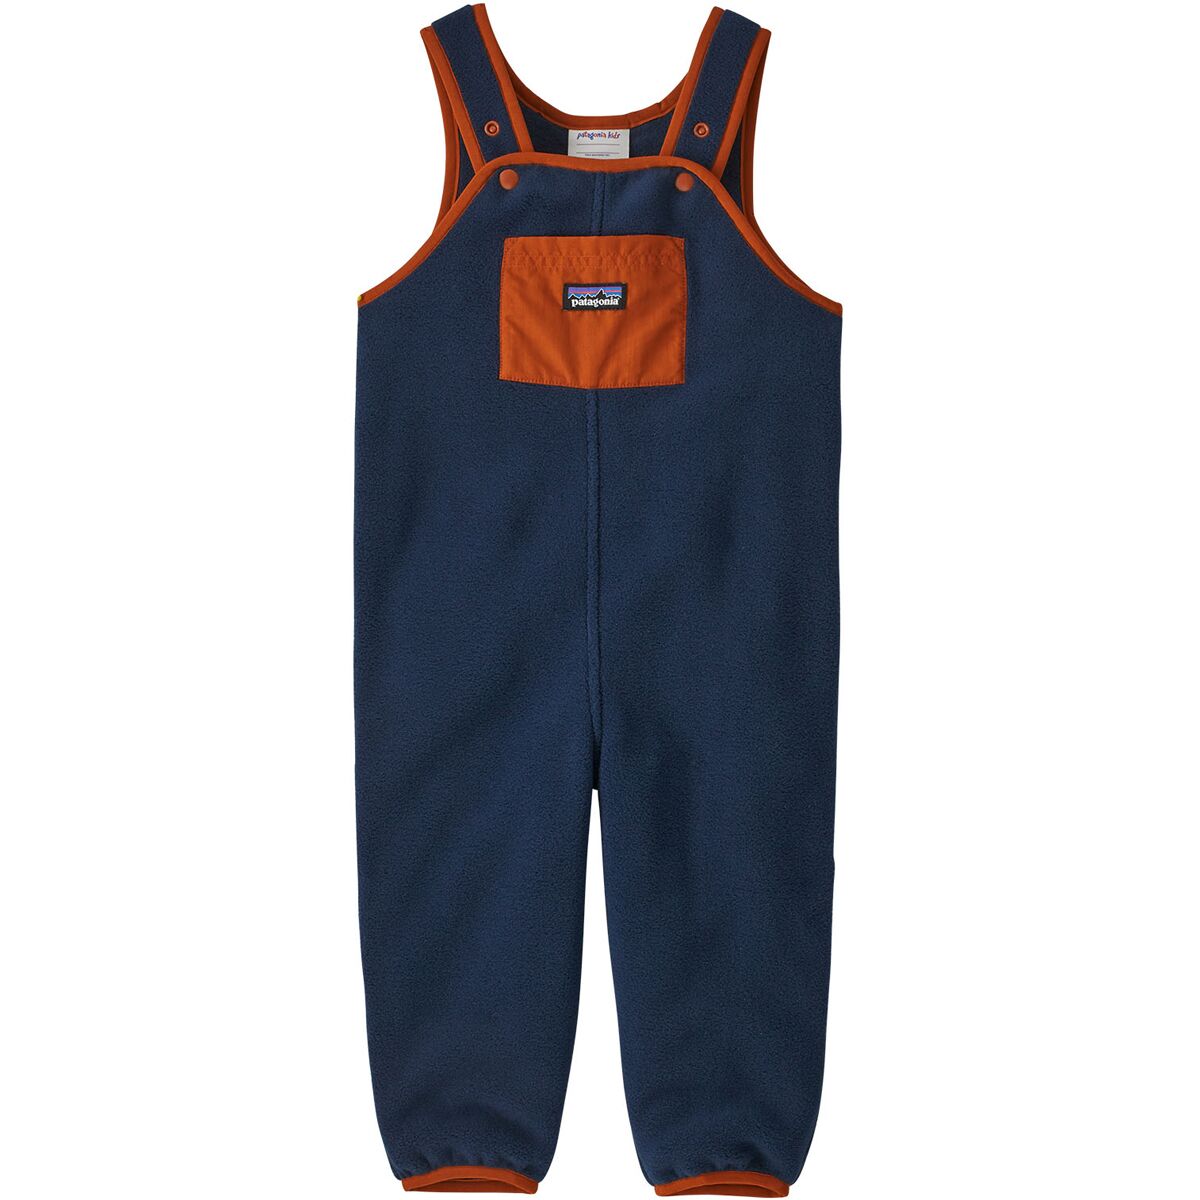 Patagonia Synchilla Overall - Toddlers'